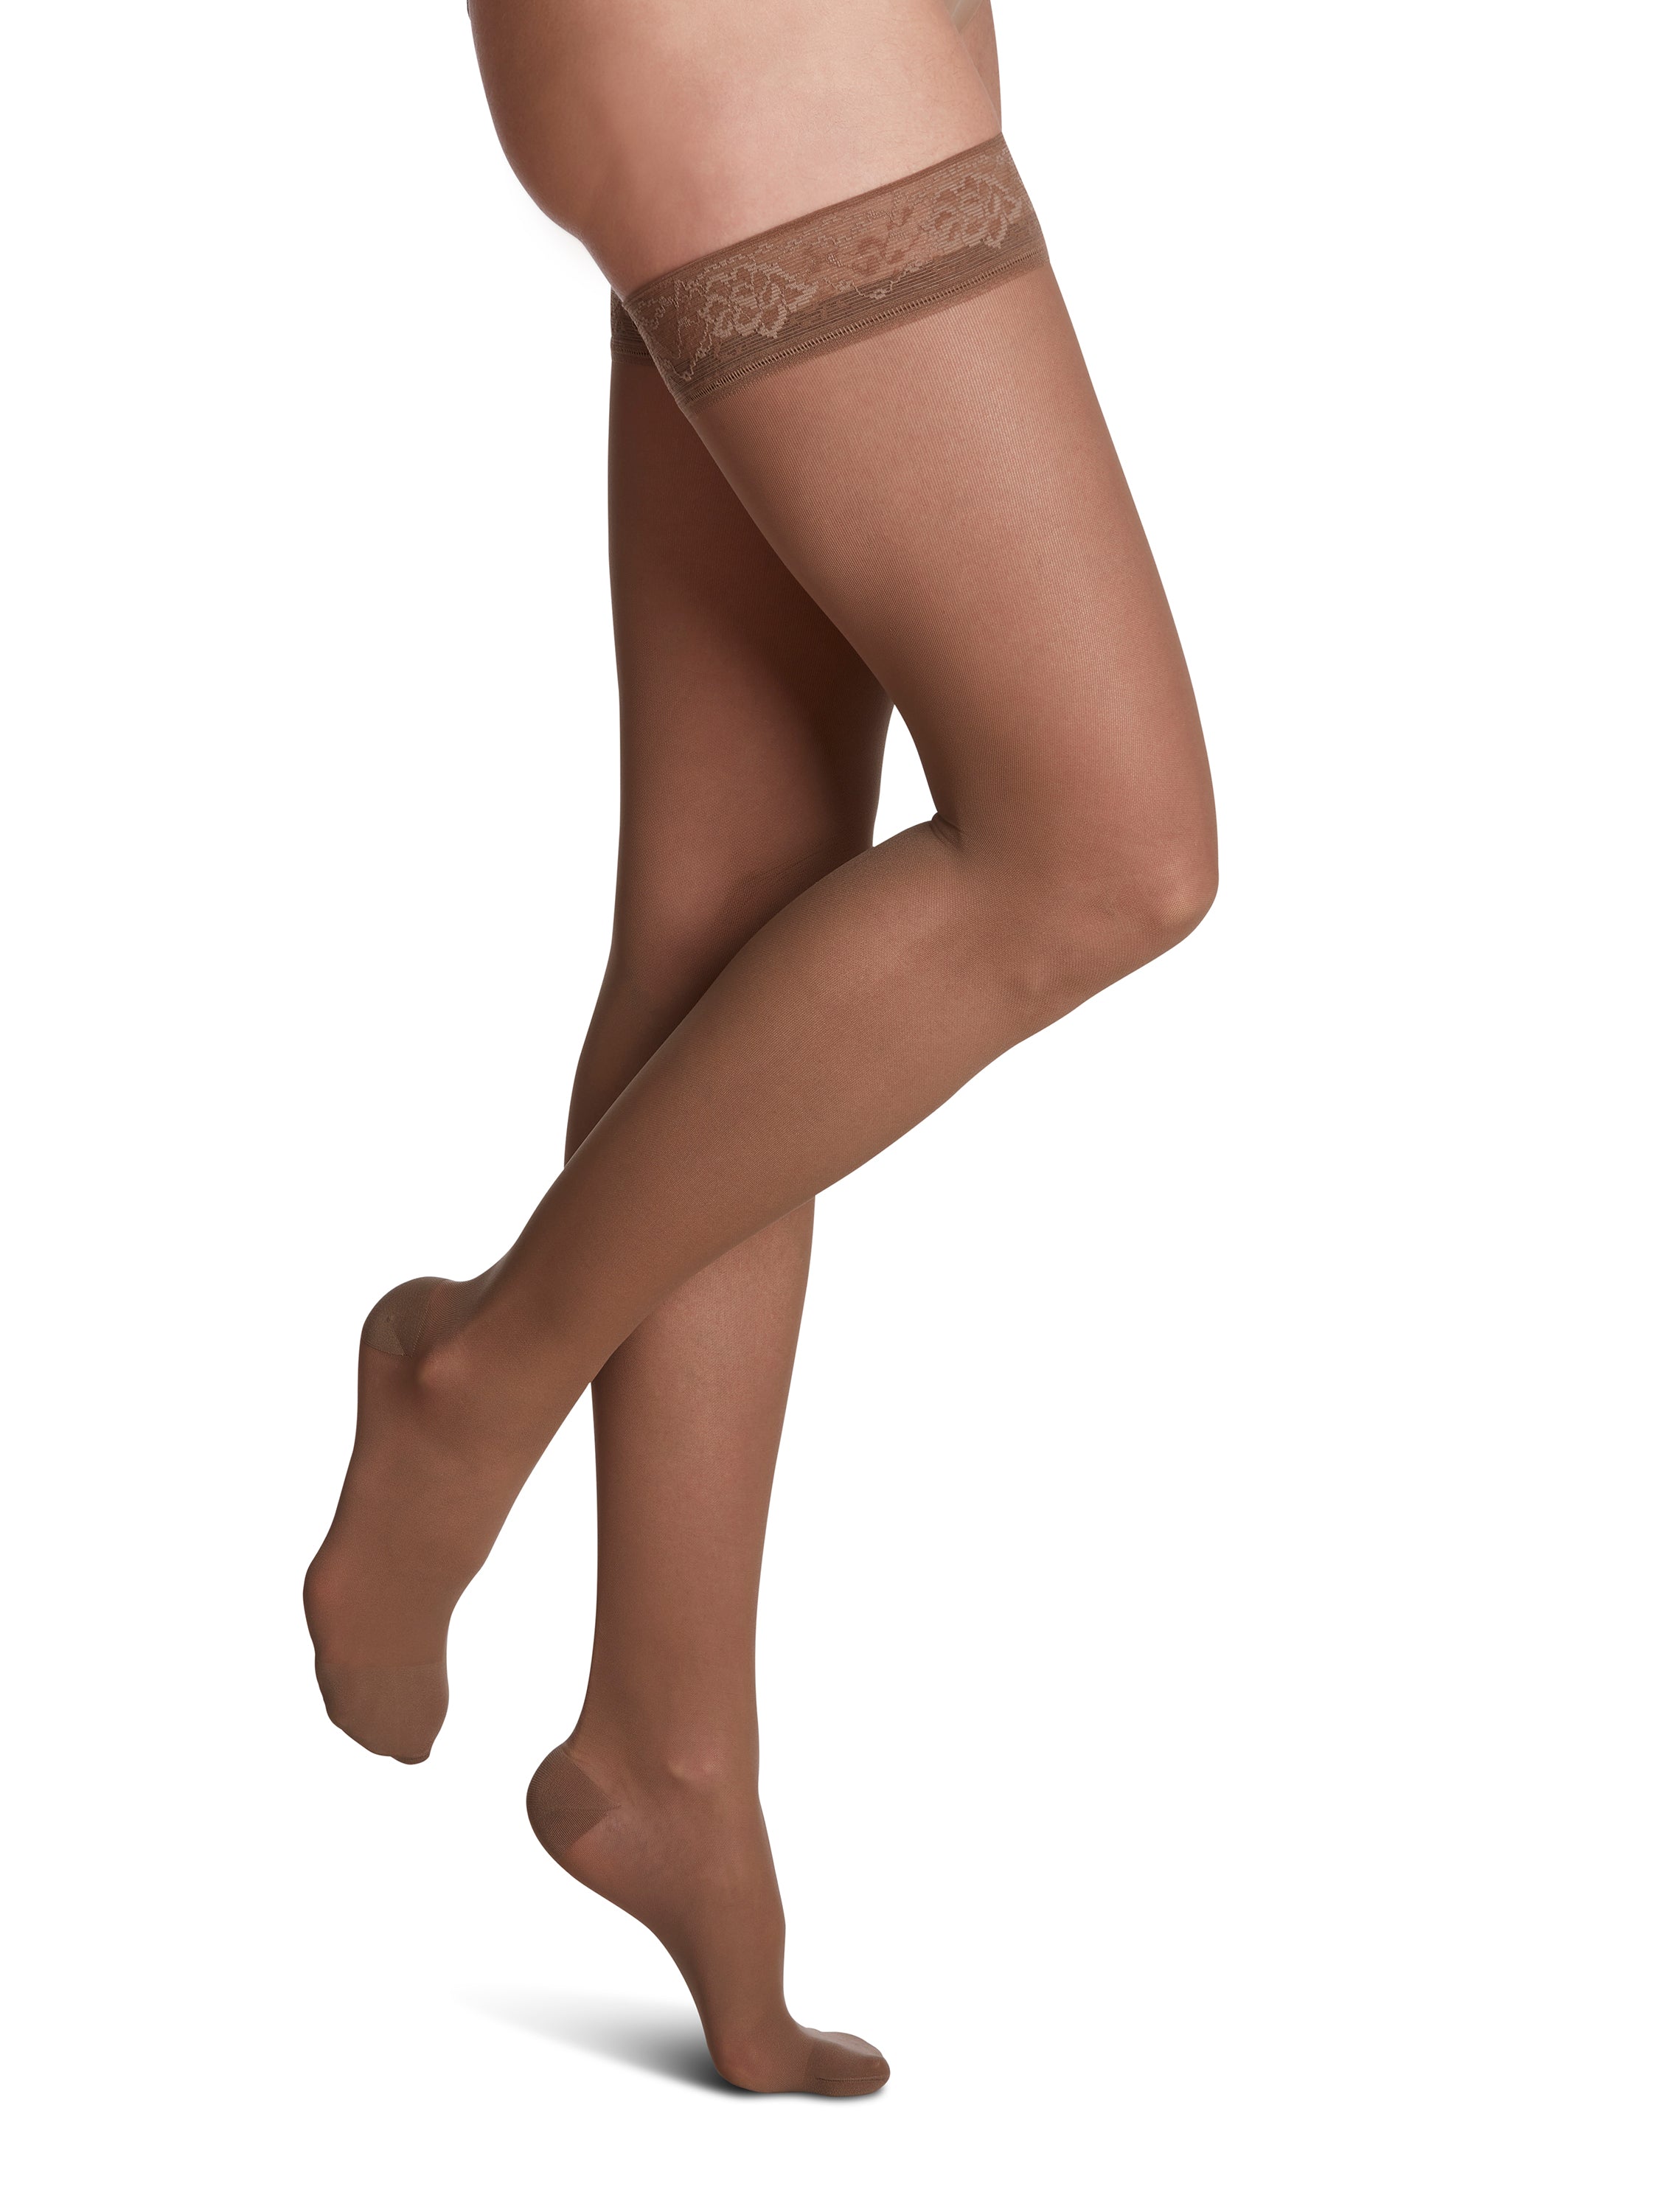 Sigvaris Women's Style Sheer Thigh Highs CLOSED Toe in FASHION Colors